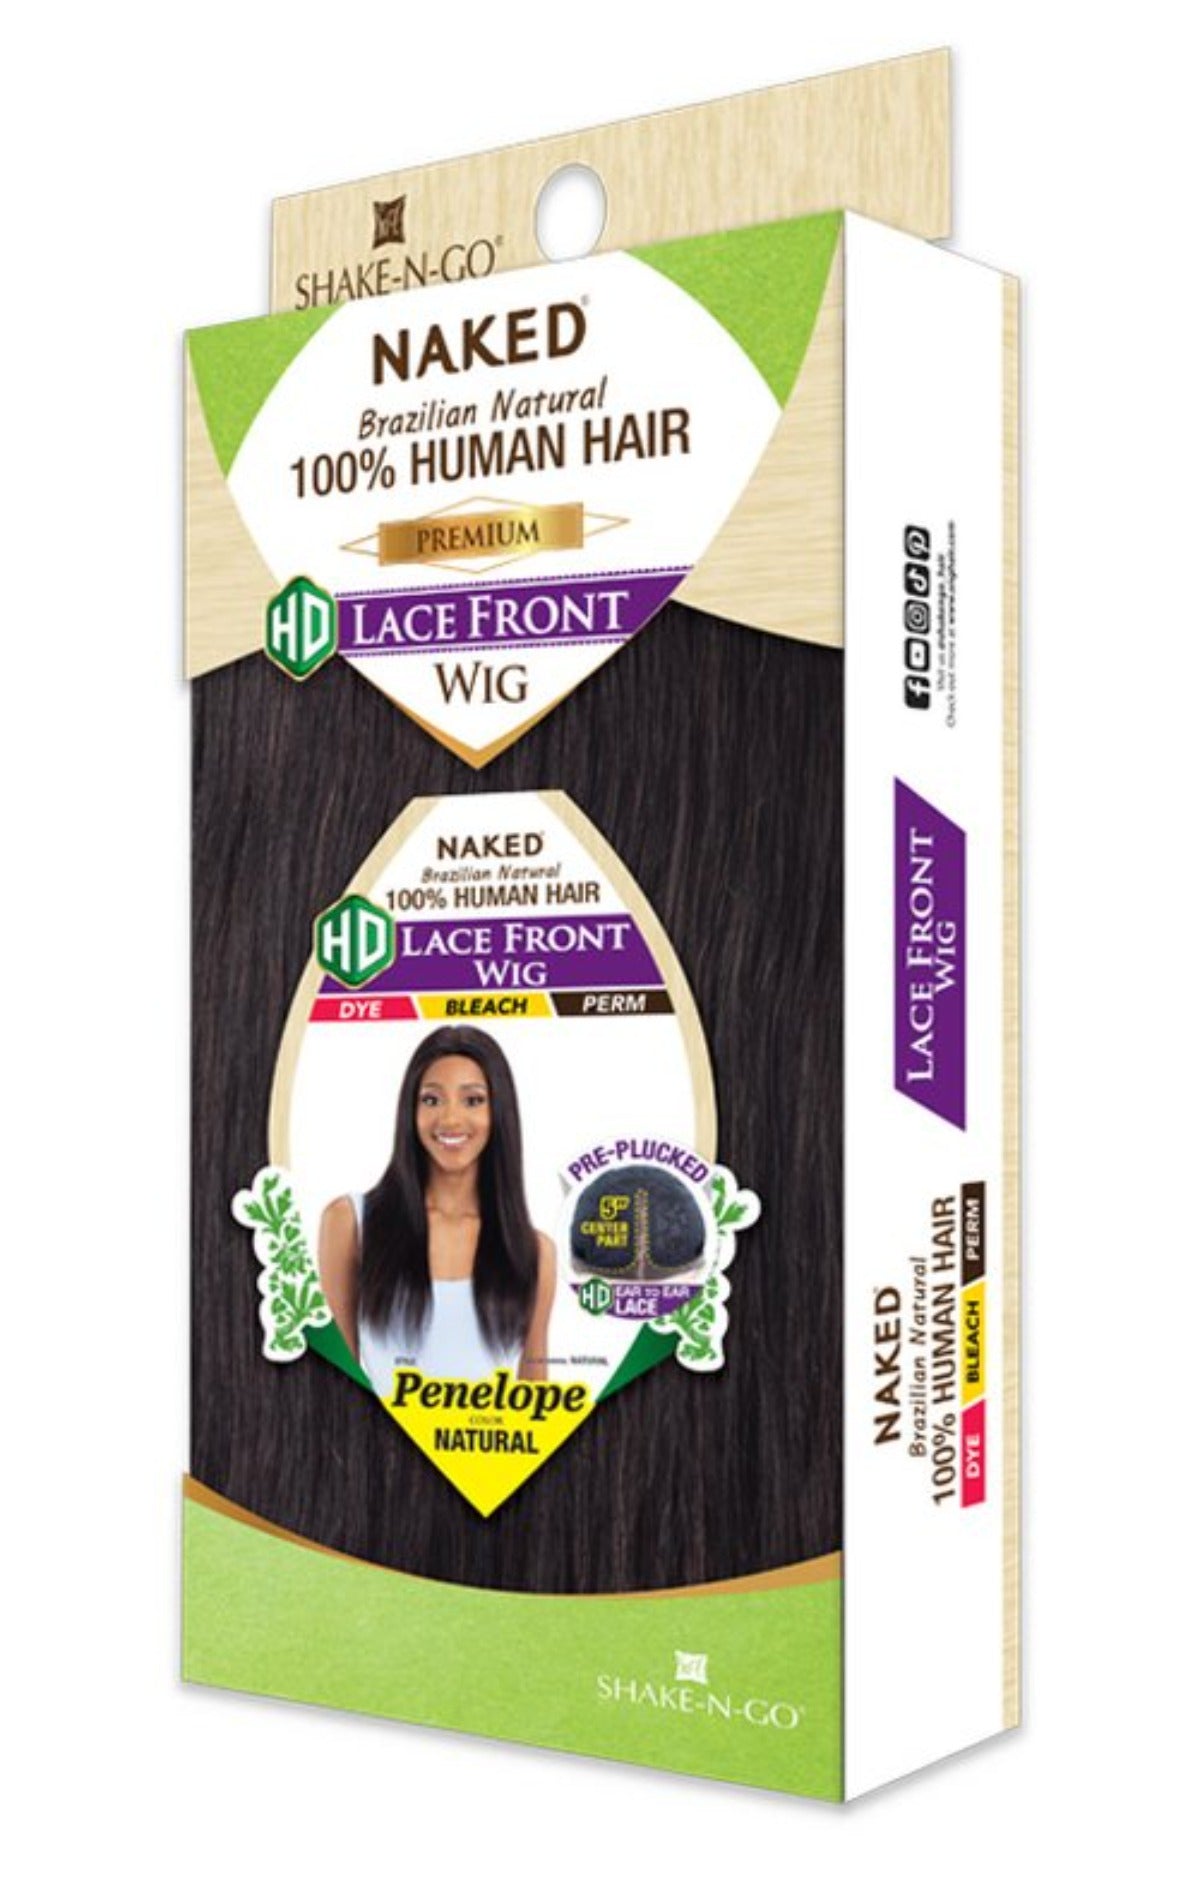 Shake N Go Naked Brazilian Natural 100% Human Hair Premium HD Lace Front Wig Pre-Plucked PENELOPE